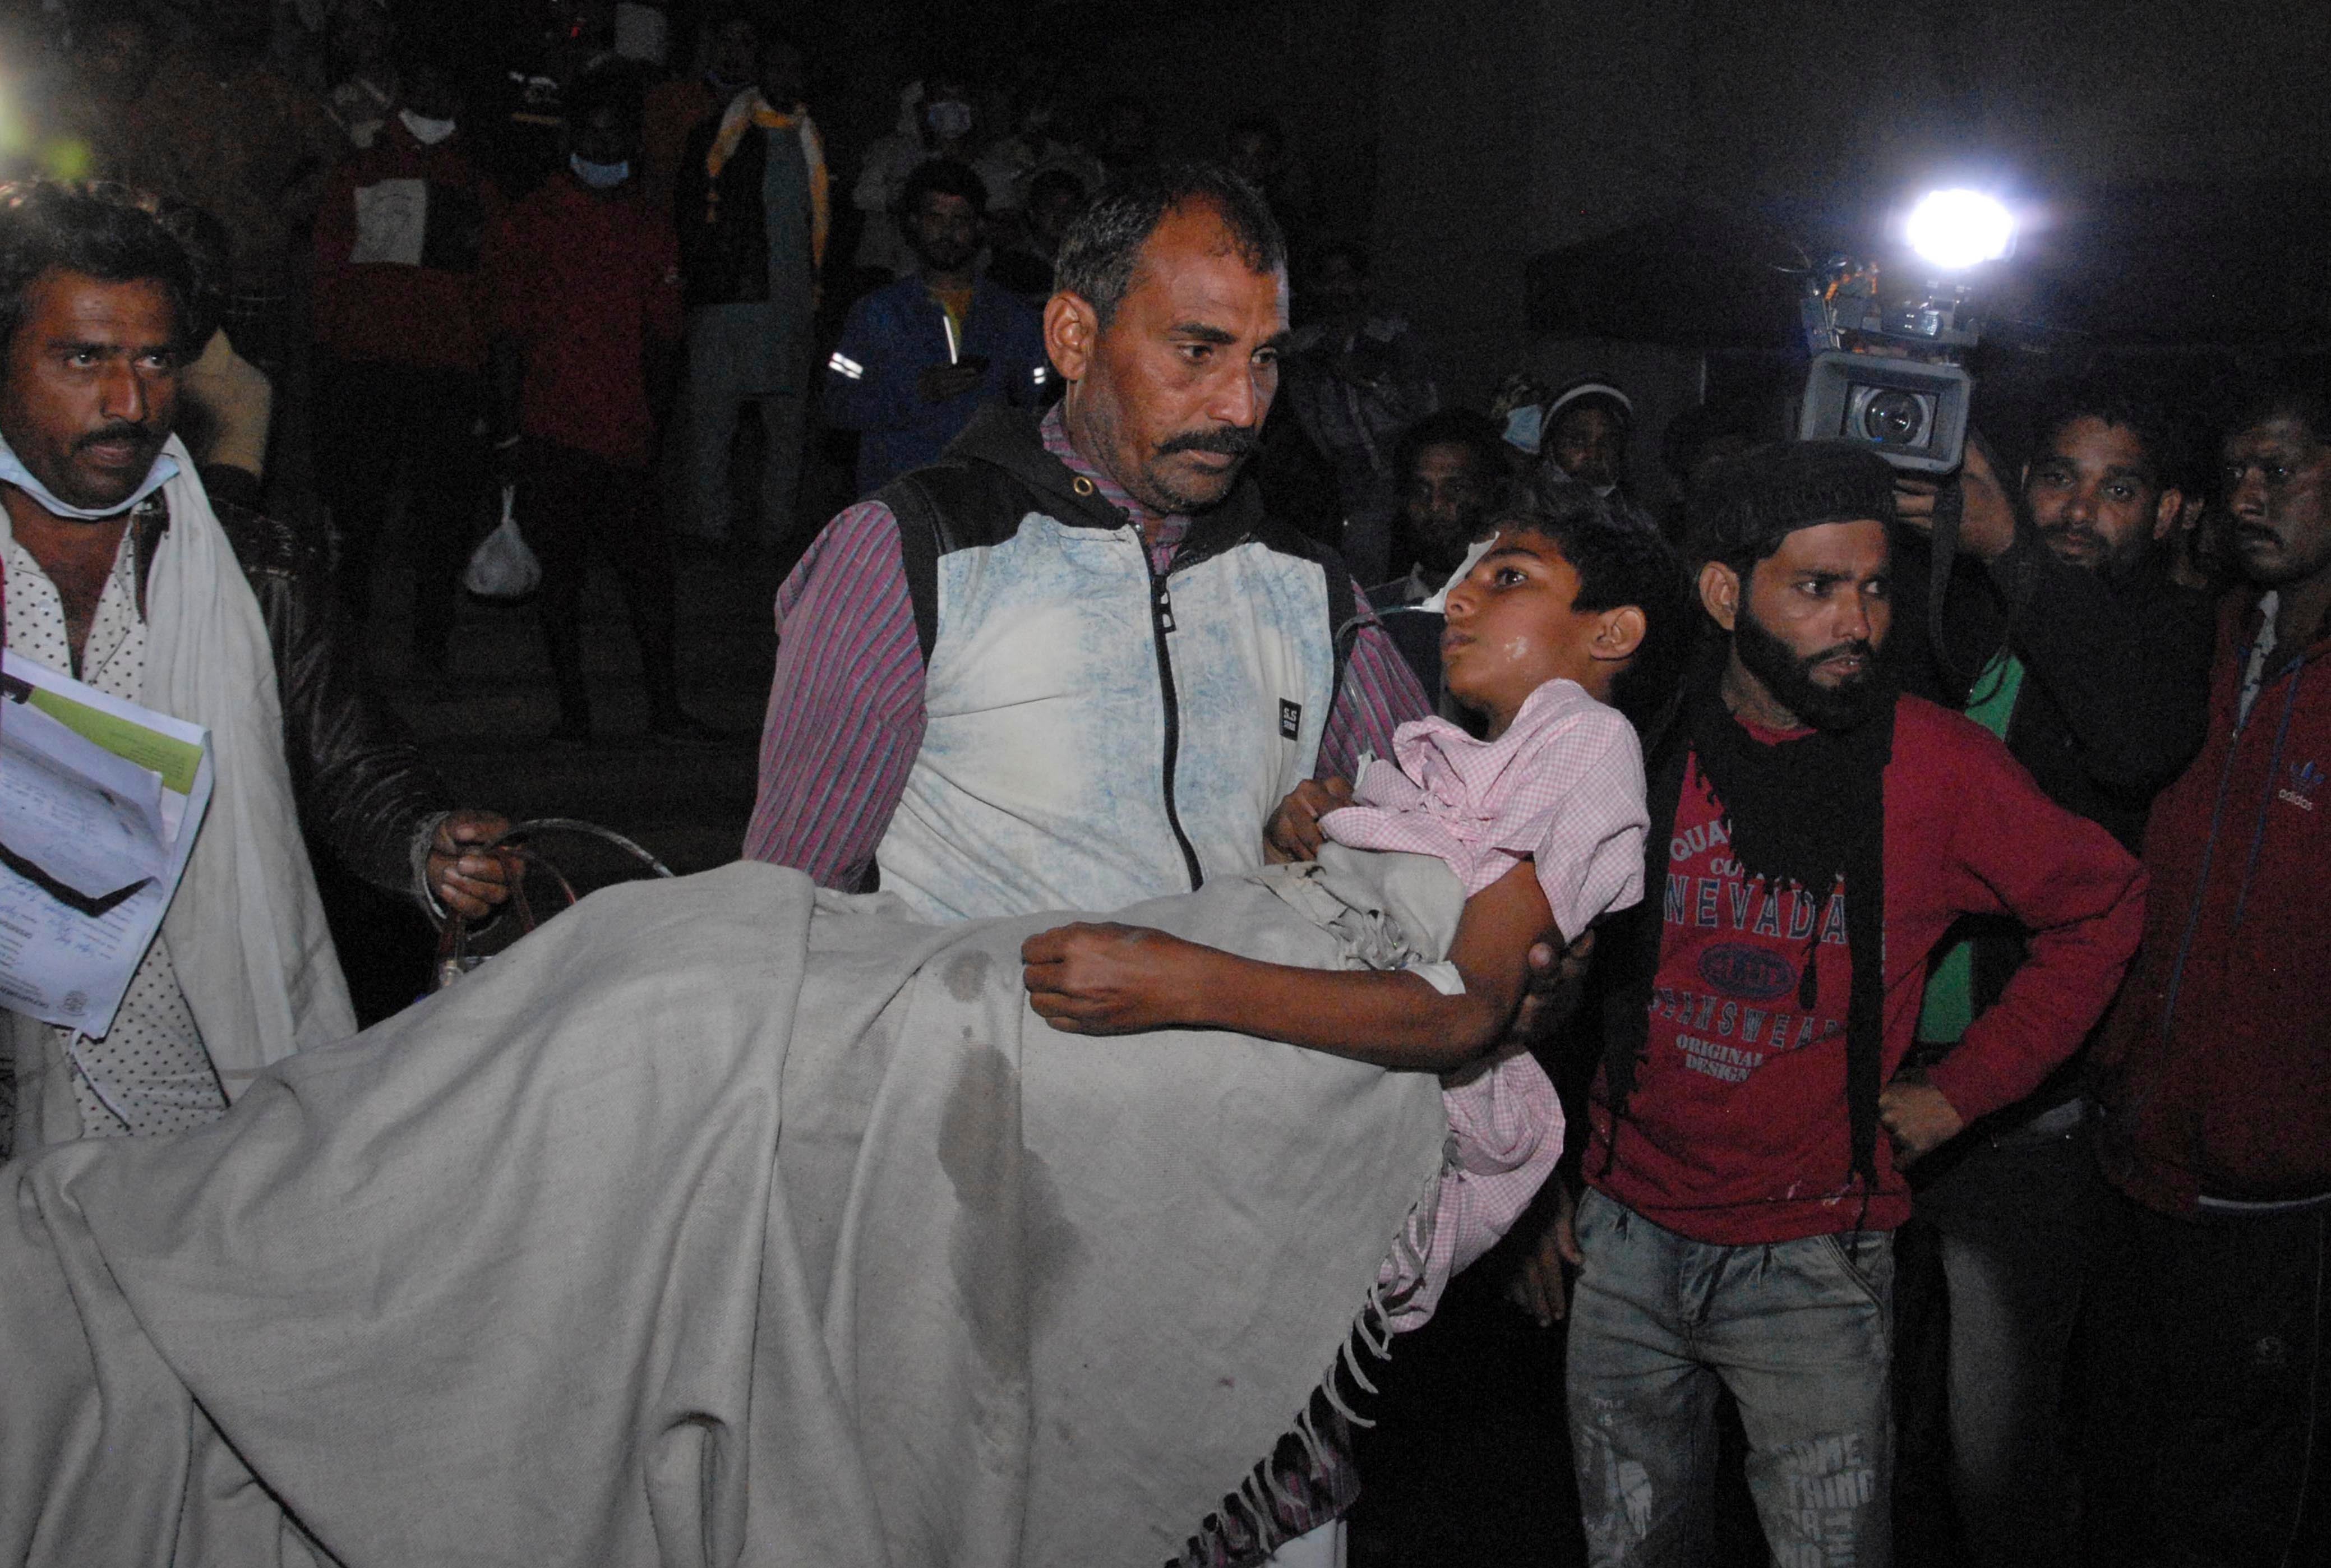 A man carries a child out from the Kamla Nehru Children's Hospital after a fire in the newborn care unit of the hospital killed four infants, in Bhopal, India